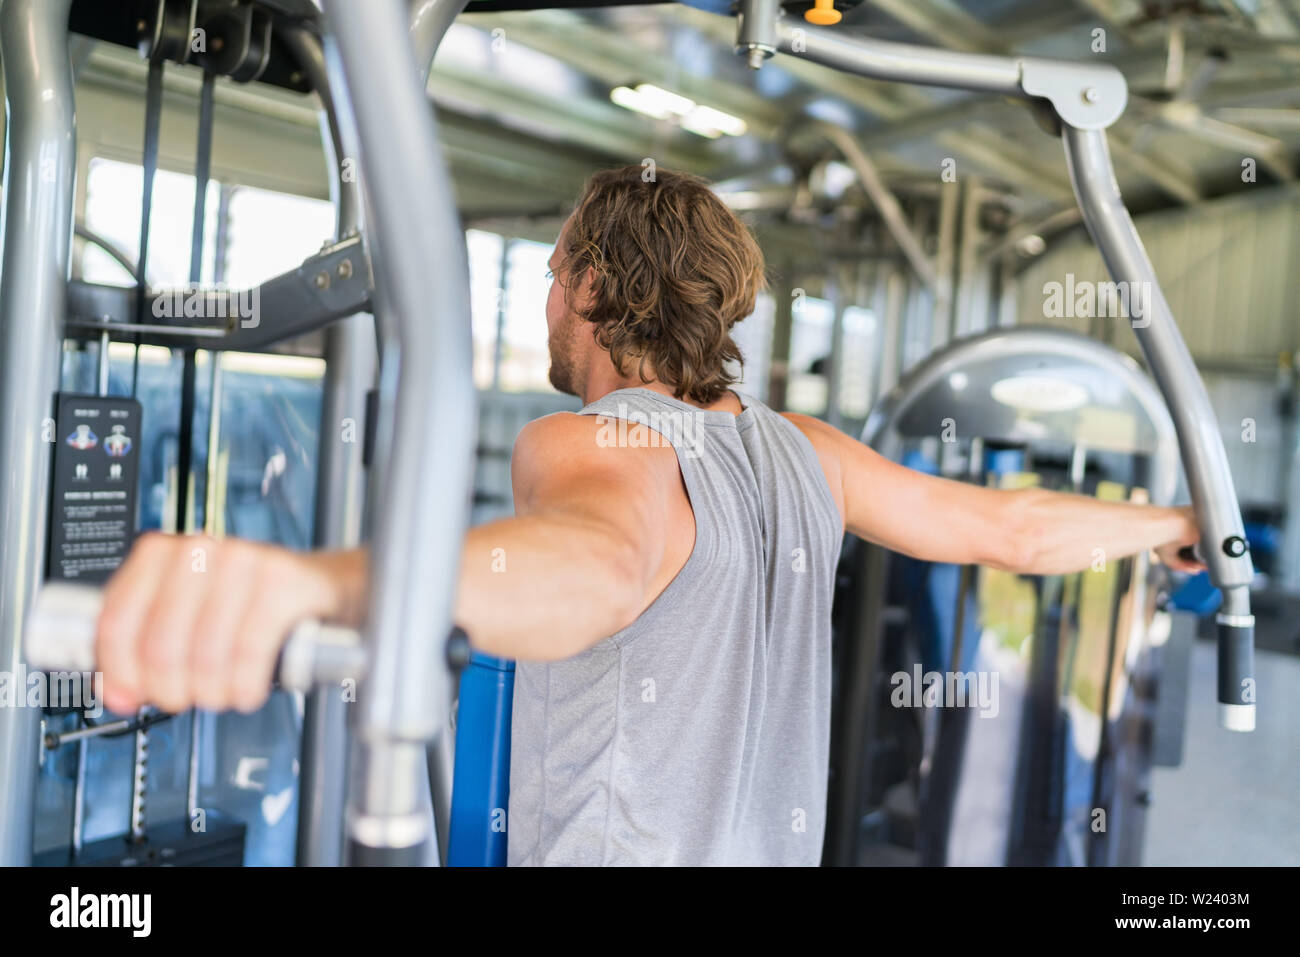 Man from behind training at fitness gym. Man doing workout on